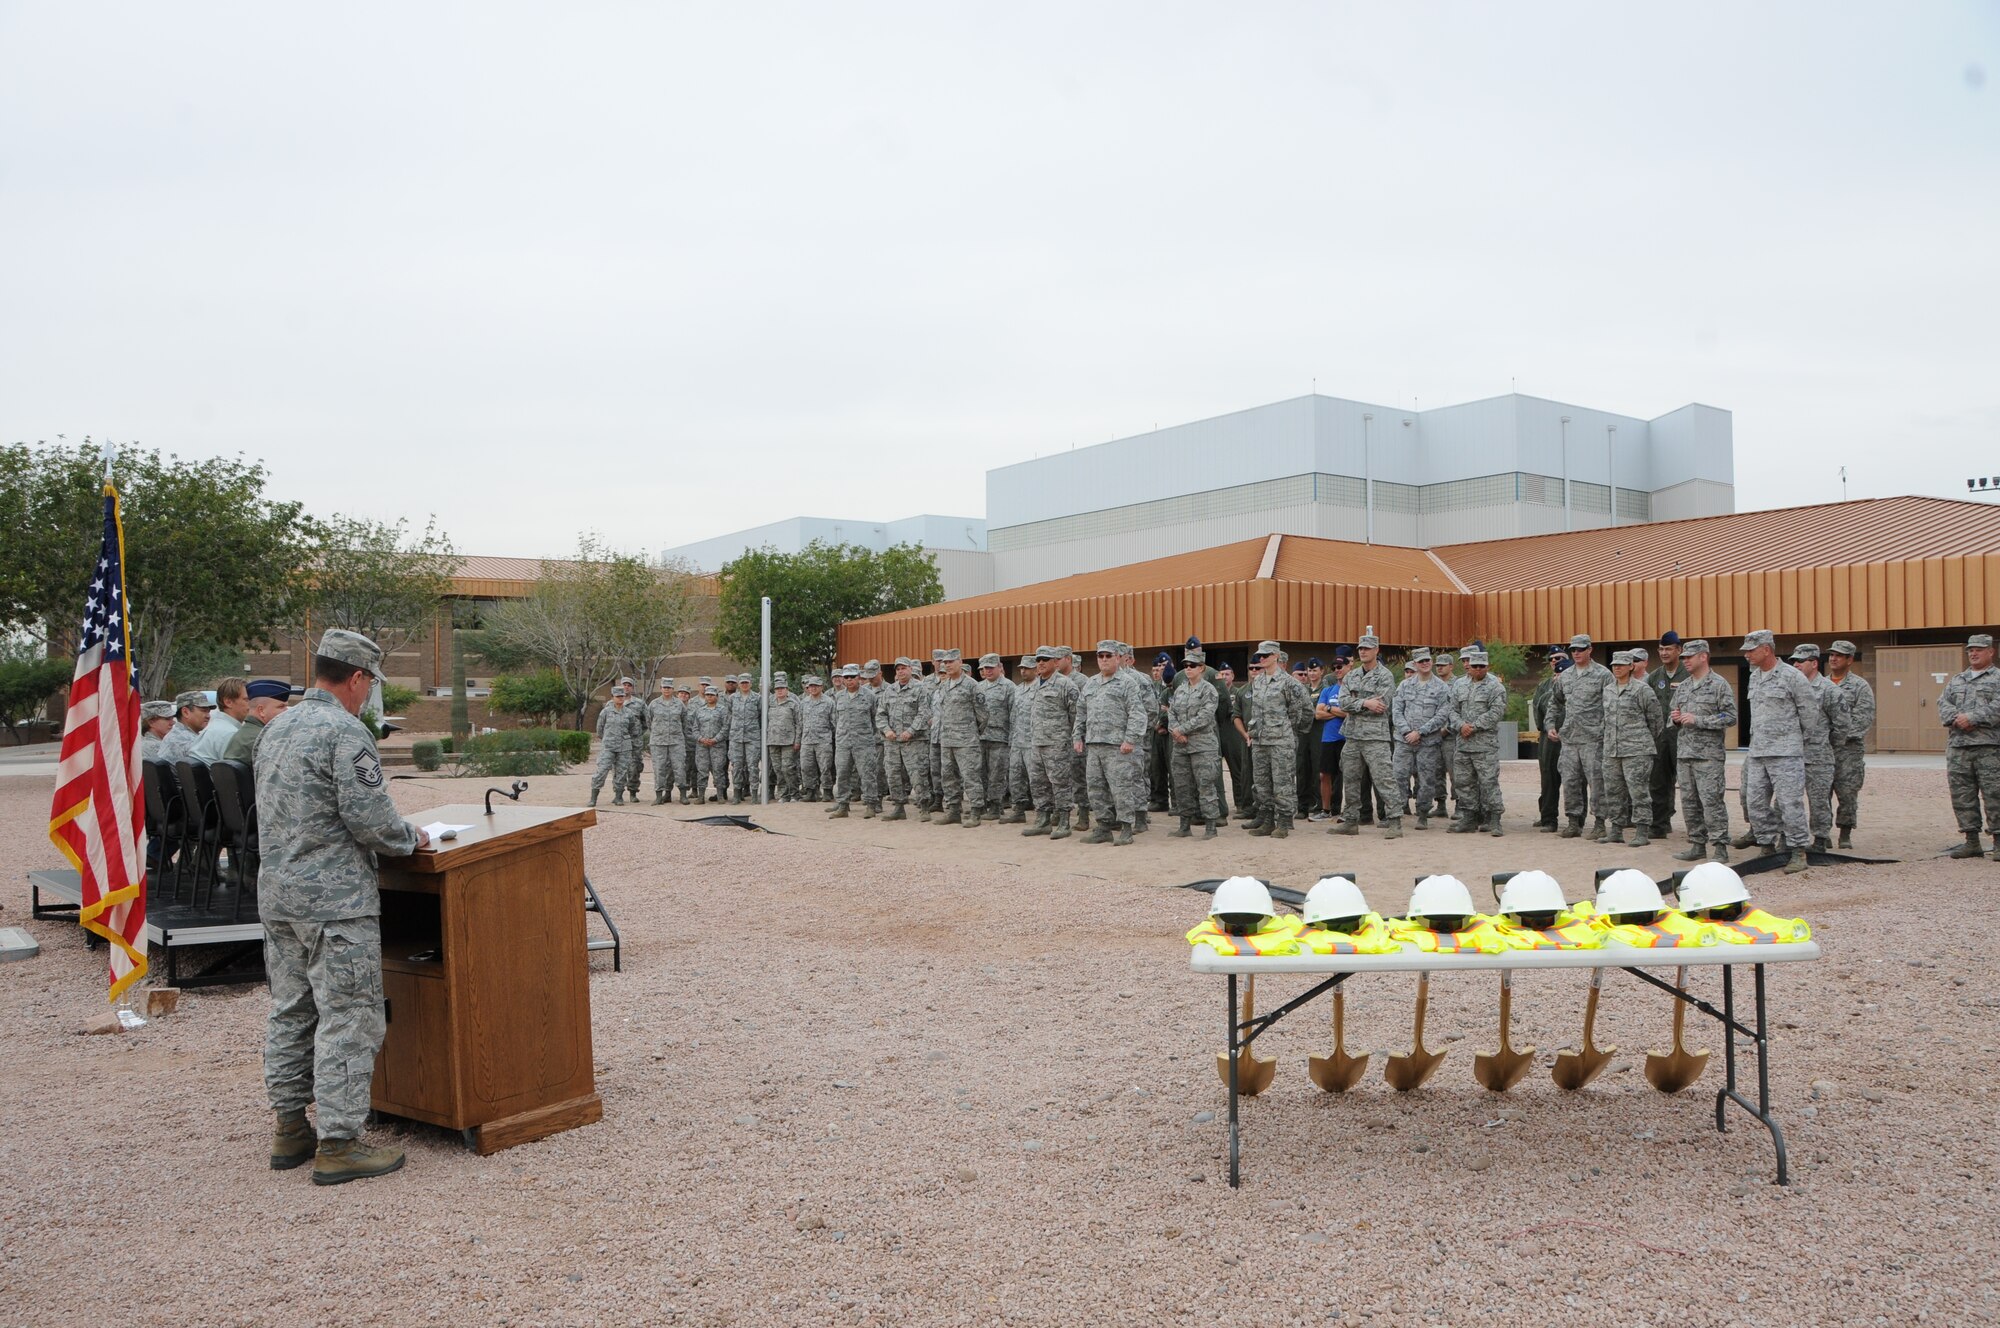 Airmen from the 161st Air Refueling Wing gather for a ground breaking ceremony for the Base Fitness Center, Nov.14 here at Phoenix Sky Harbor Air National Guard Base. The 2,400 square foot fitness center, which is scheduled to open in approximately six months, will provide Airmen twice the square footage of the existing facility, add daylighting features, industrial architecture finishes, 20 foot vaulted ceilings and reverse osmosis drinking water. (U. S. Air National Guard photo by Master Sgt. Kelly M. Deitloff/Released)